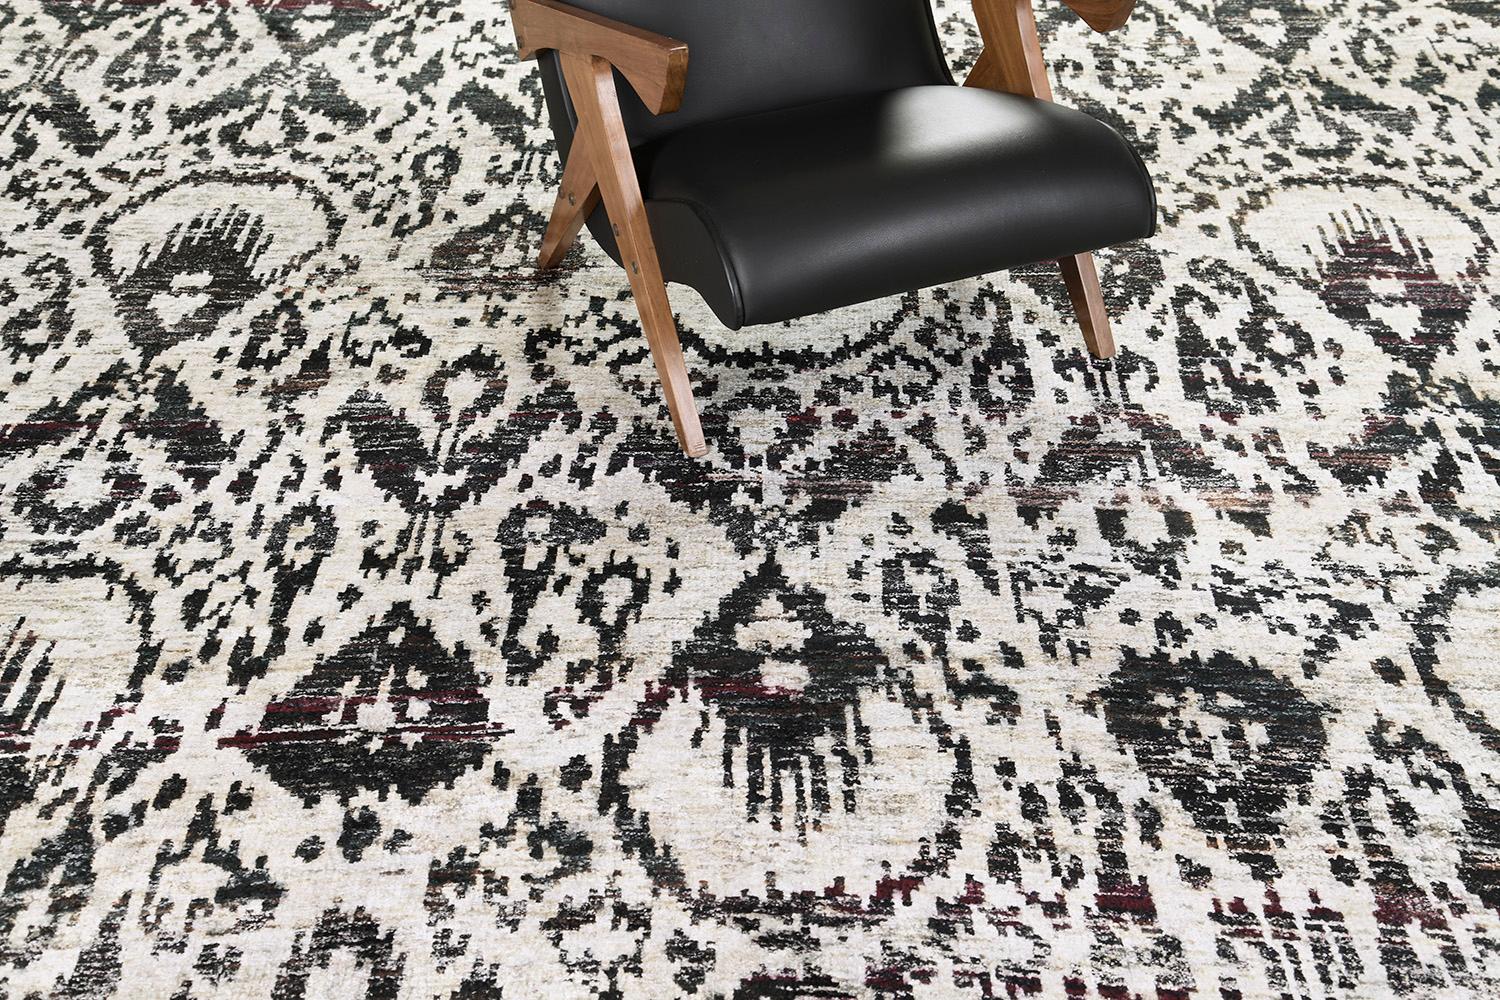 Balancing a bold and beguiling style, this Ikat design rug made of bamboo silk elegantly displays an artistic vibe. A distinct repetitive Ikat pattern runs along the ecru field. A perfect way to give your room a character is found in this masterful